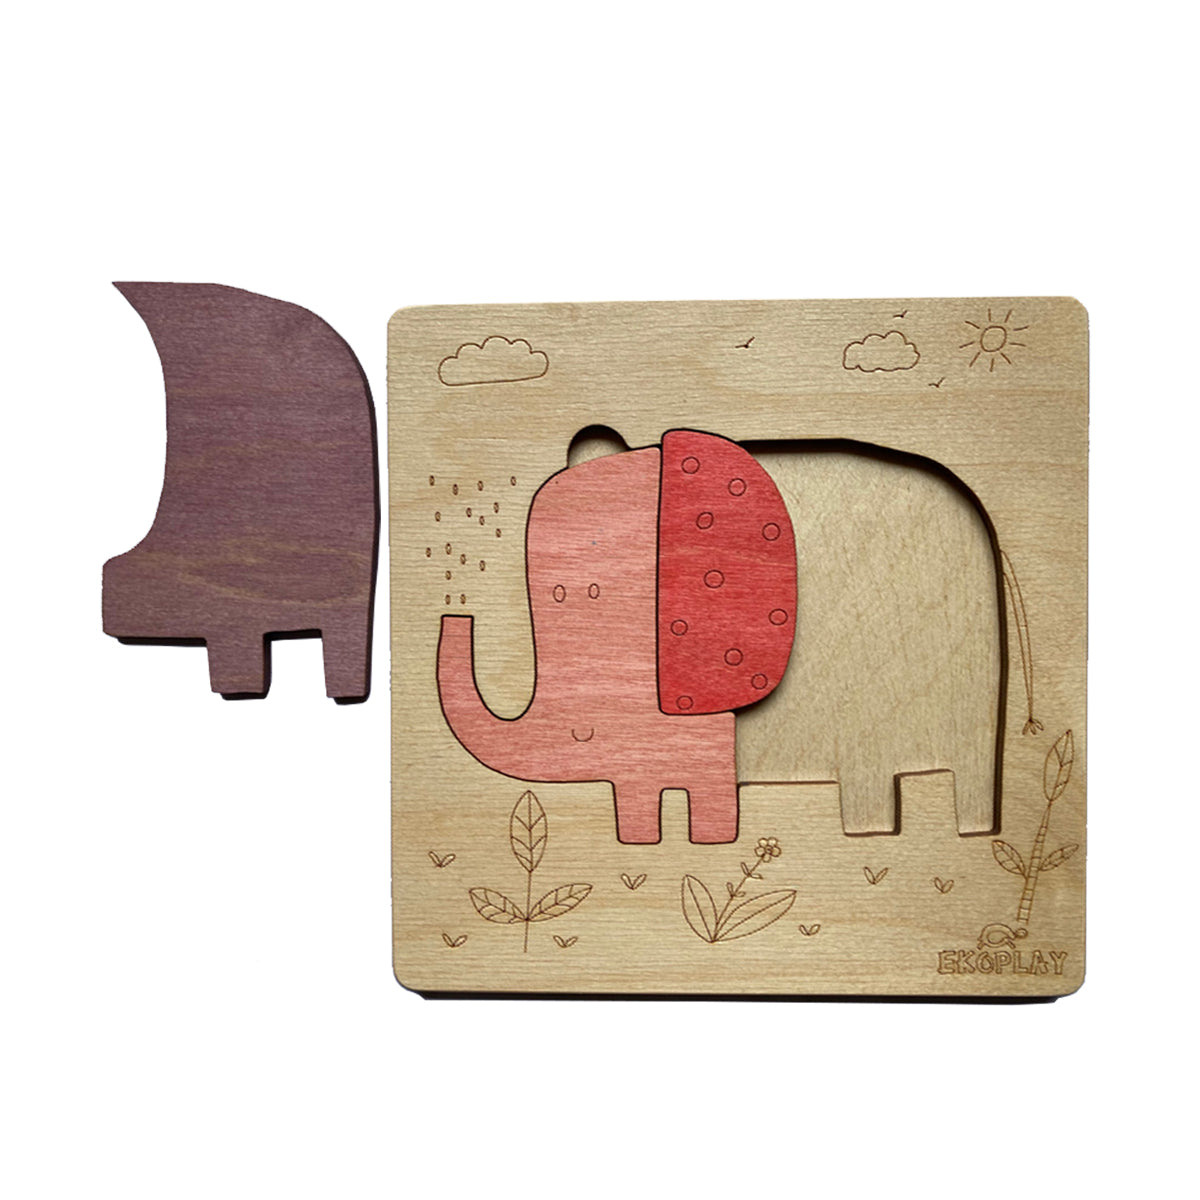 Wooden Playful Elephant Puzzle Board